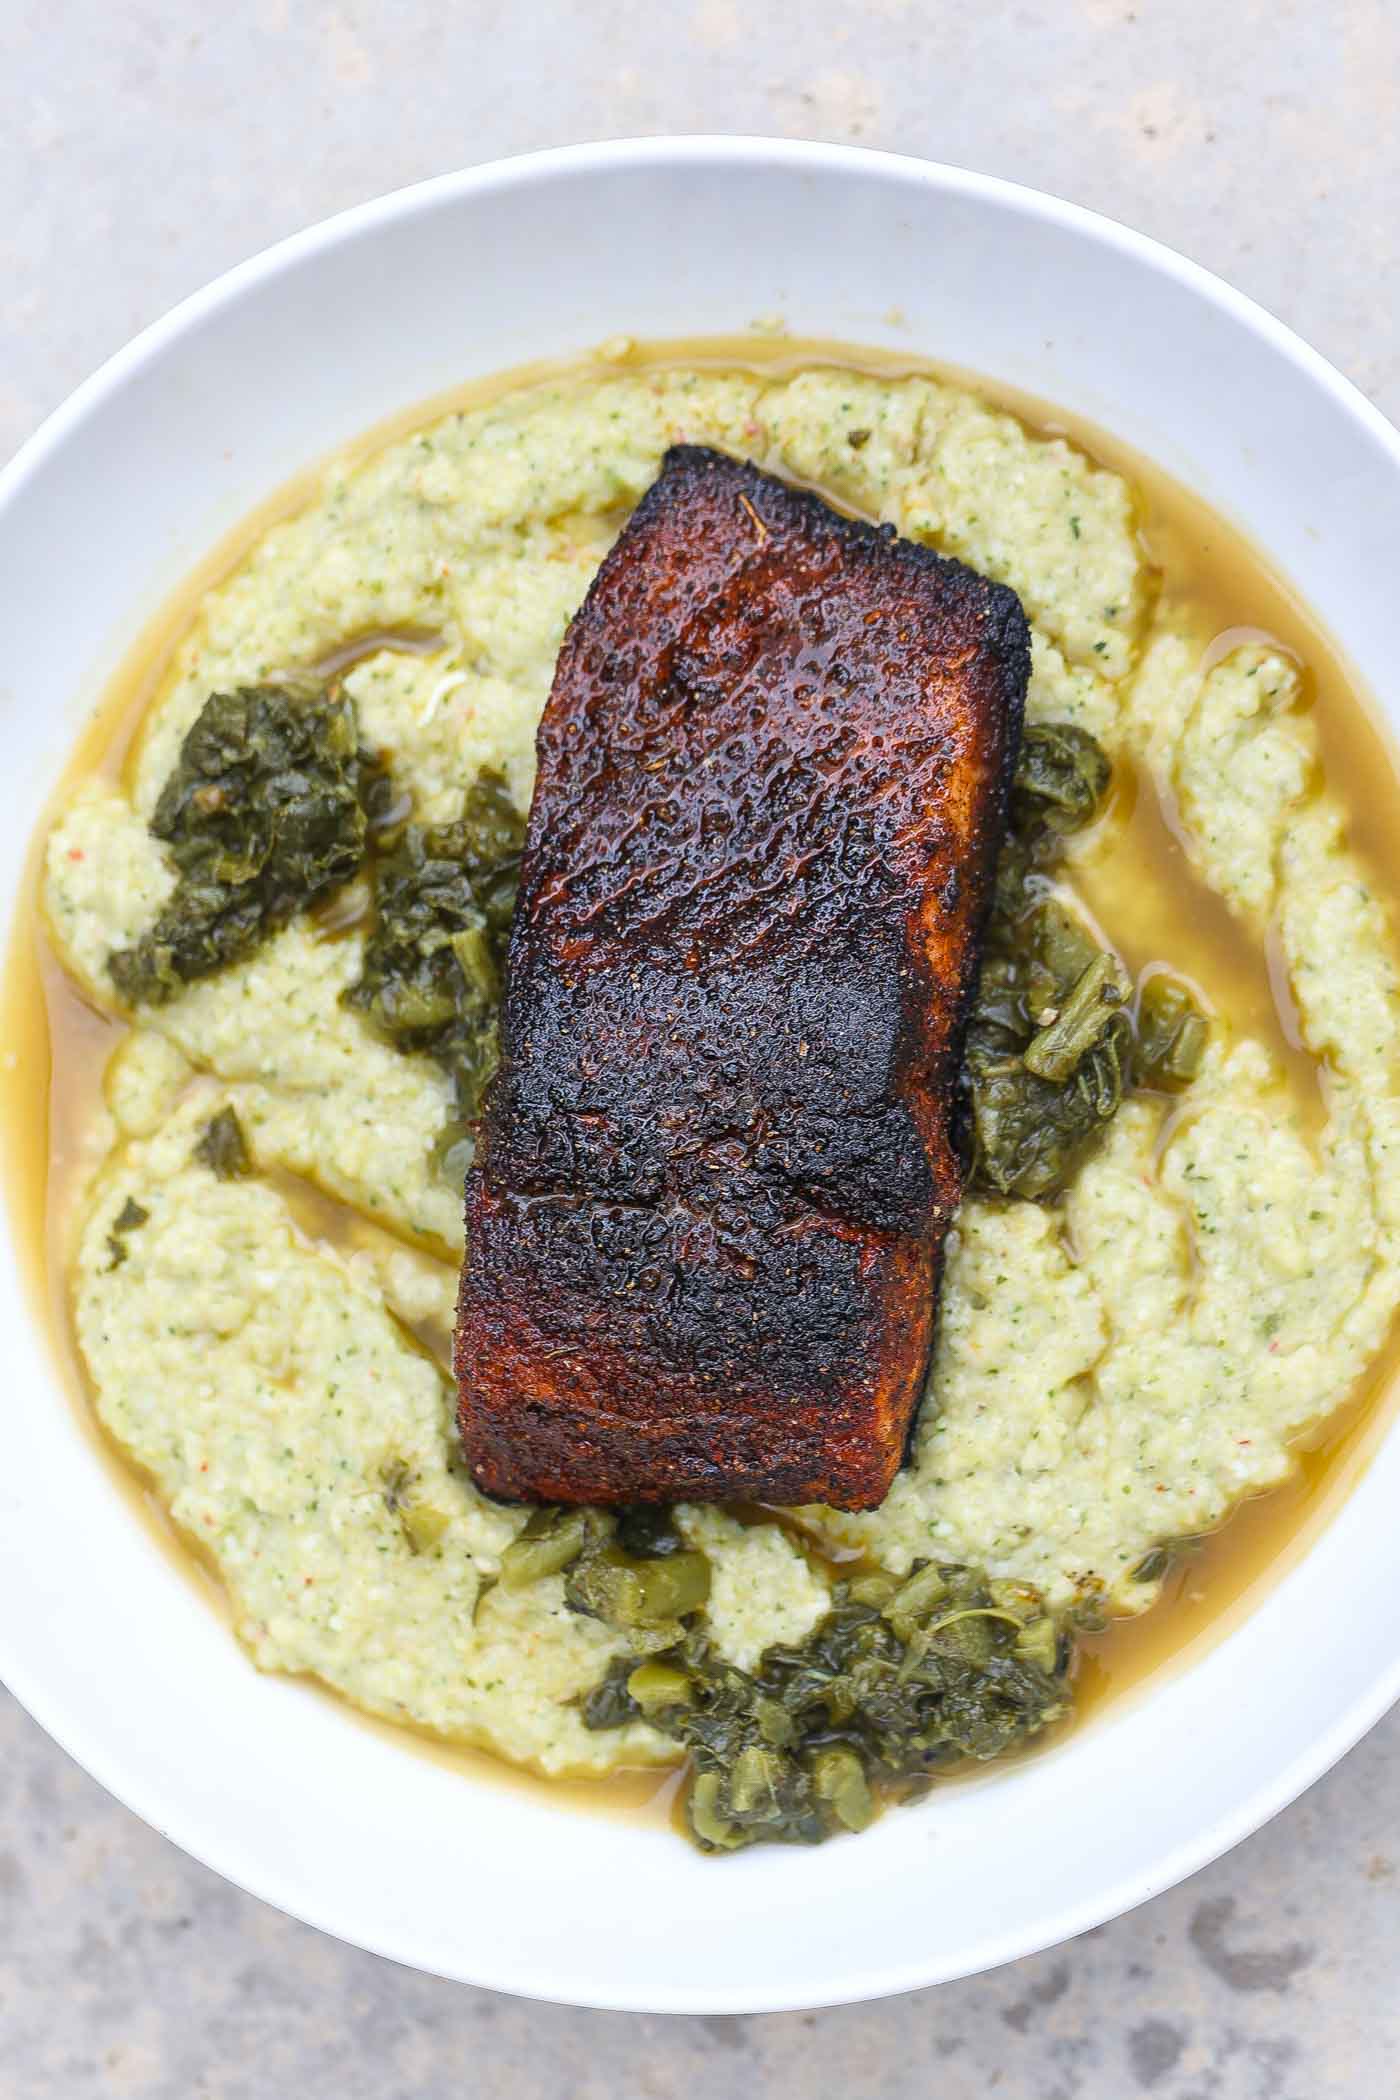 A fillet of trout with a blackened spice rub, cooked in a cast iron skillet and served over grits